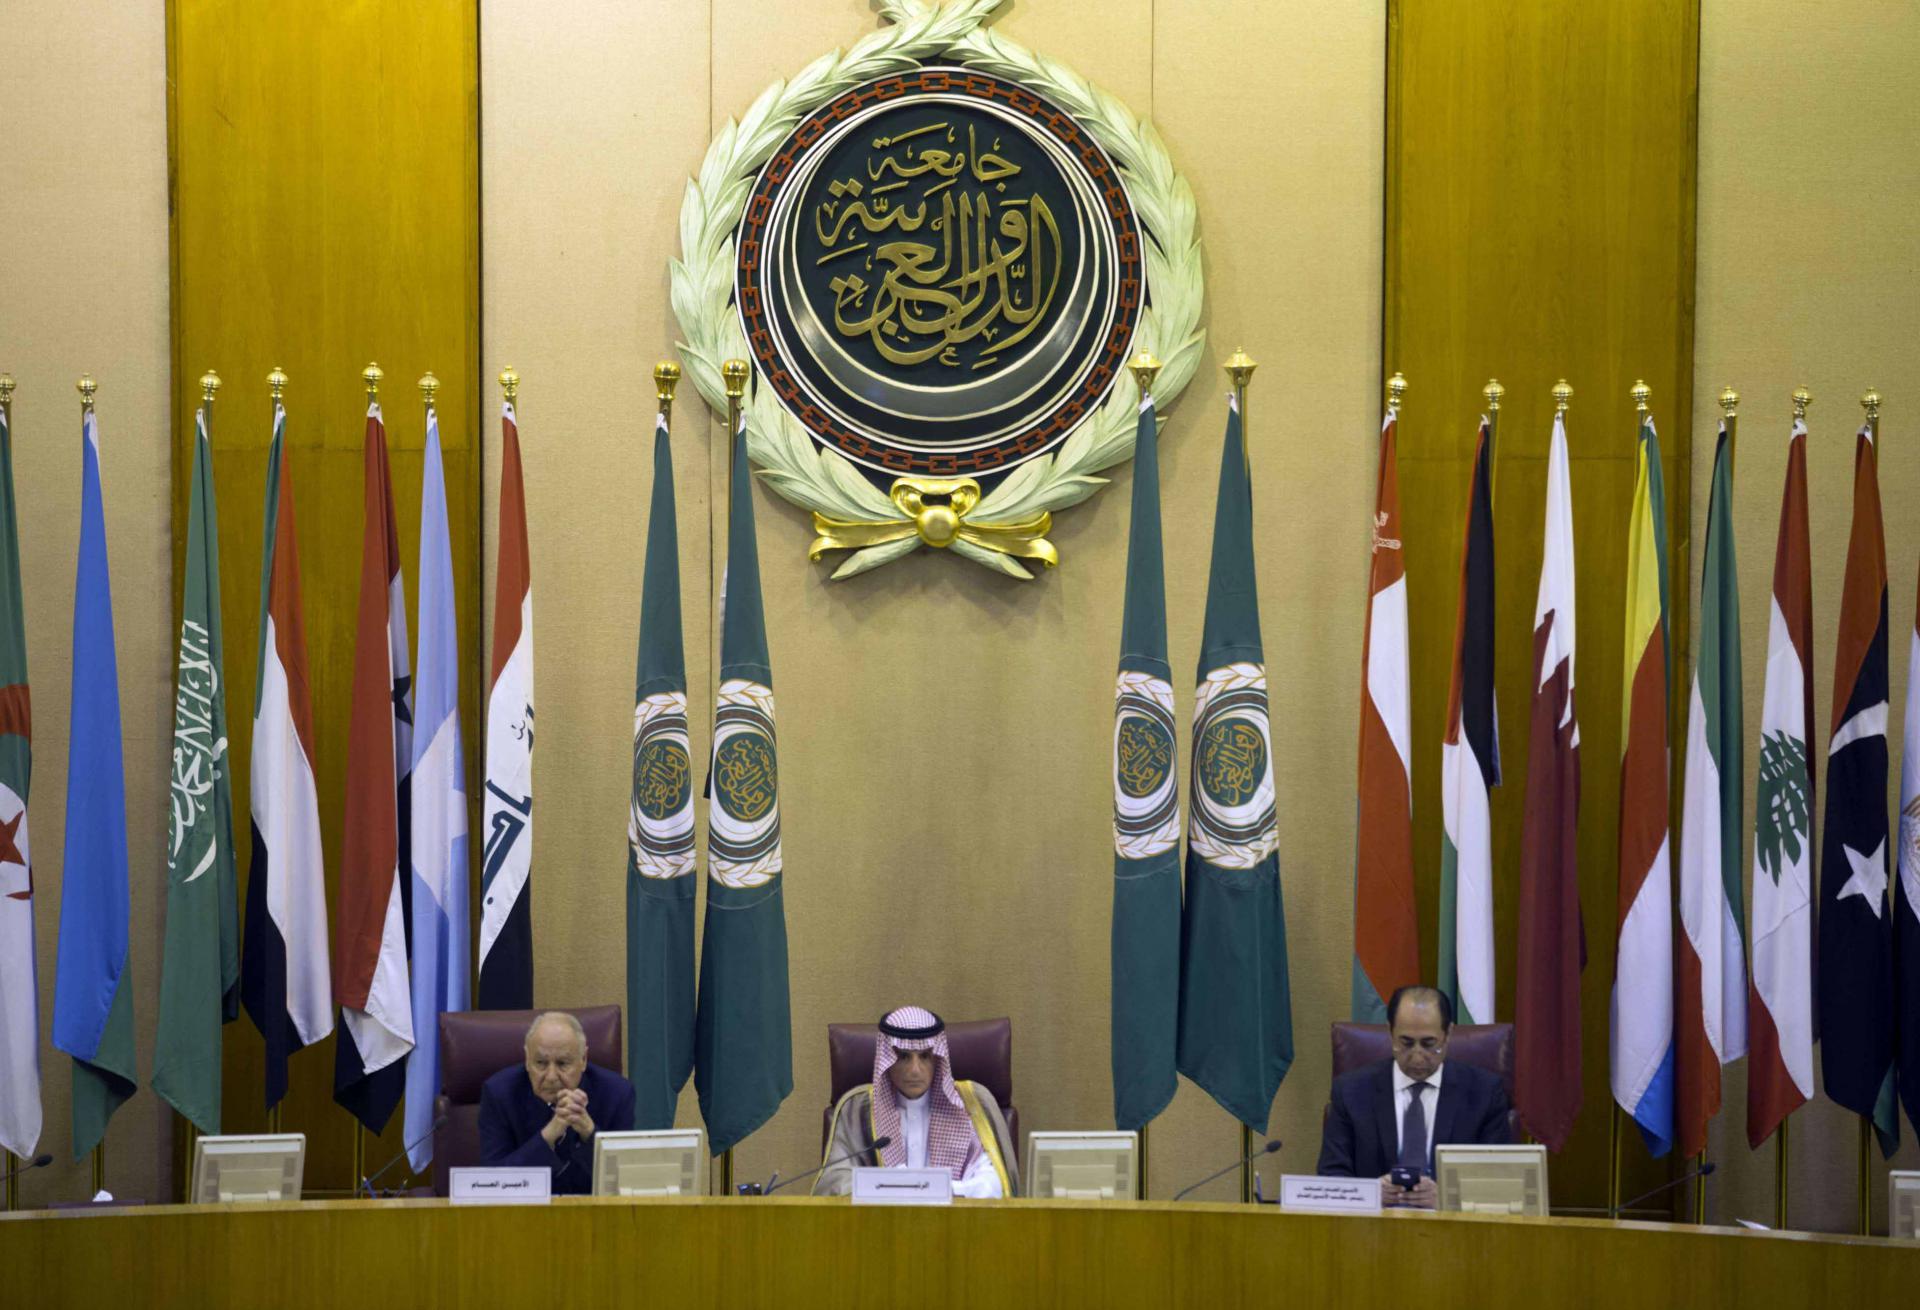 Arab League chief Ahmed Aboul Gheit (L), Saudi Foreign Minister Adel al-Jubeir (C) and Hossam Zaki, the League’s deputy secretary-general, attend Arab foreign ministers meeting in Cairo, on May 17